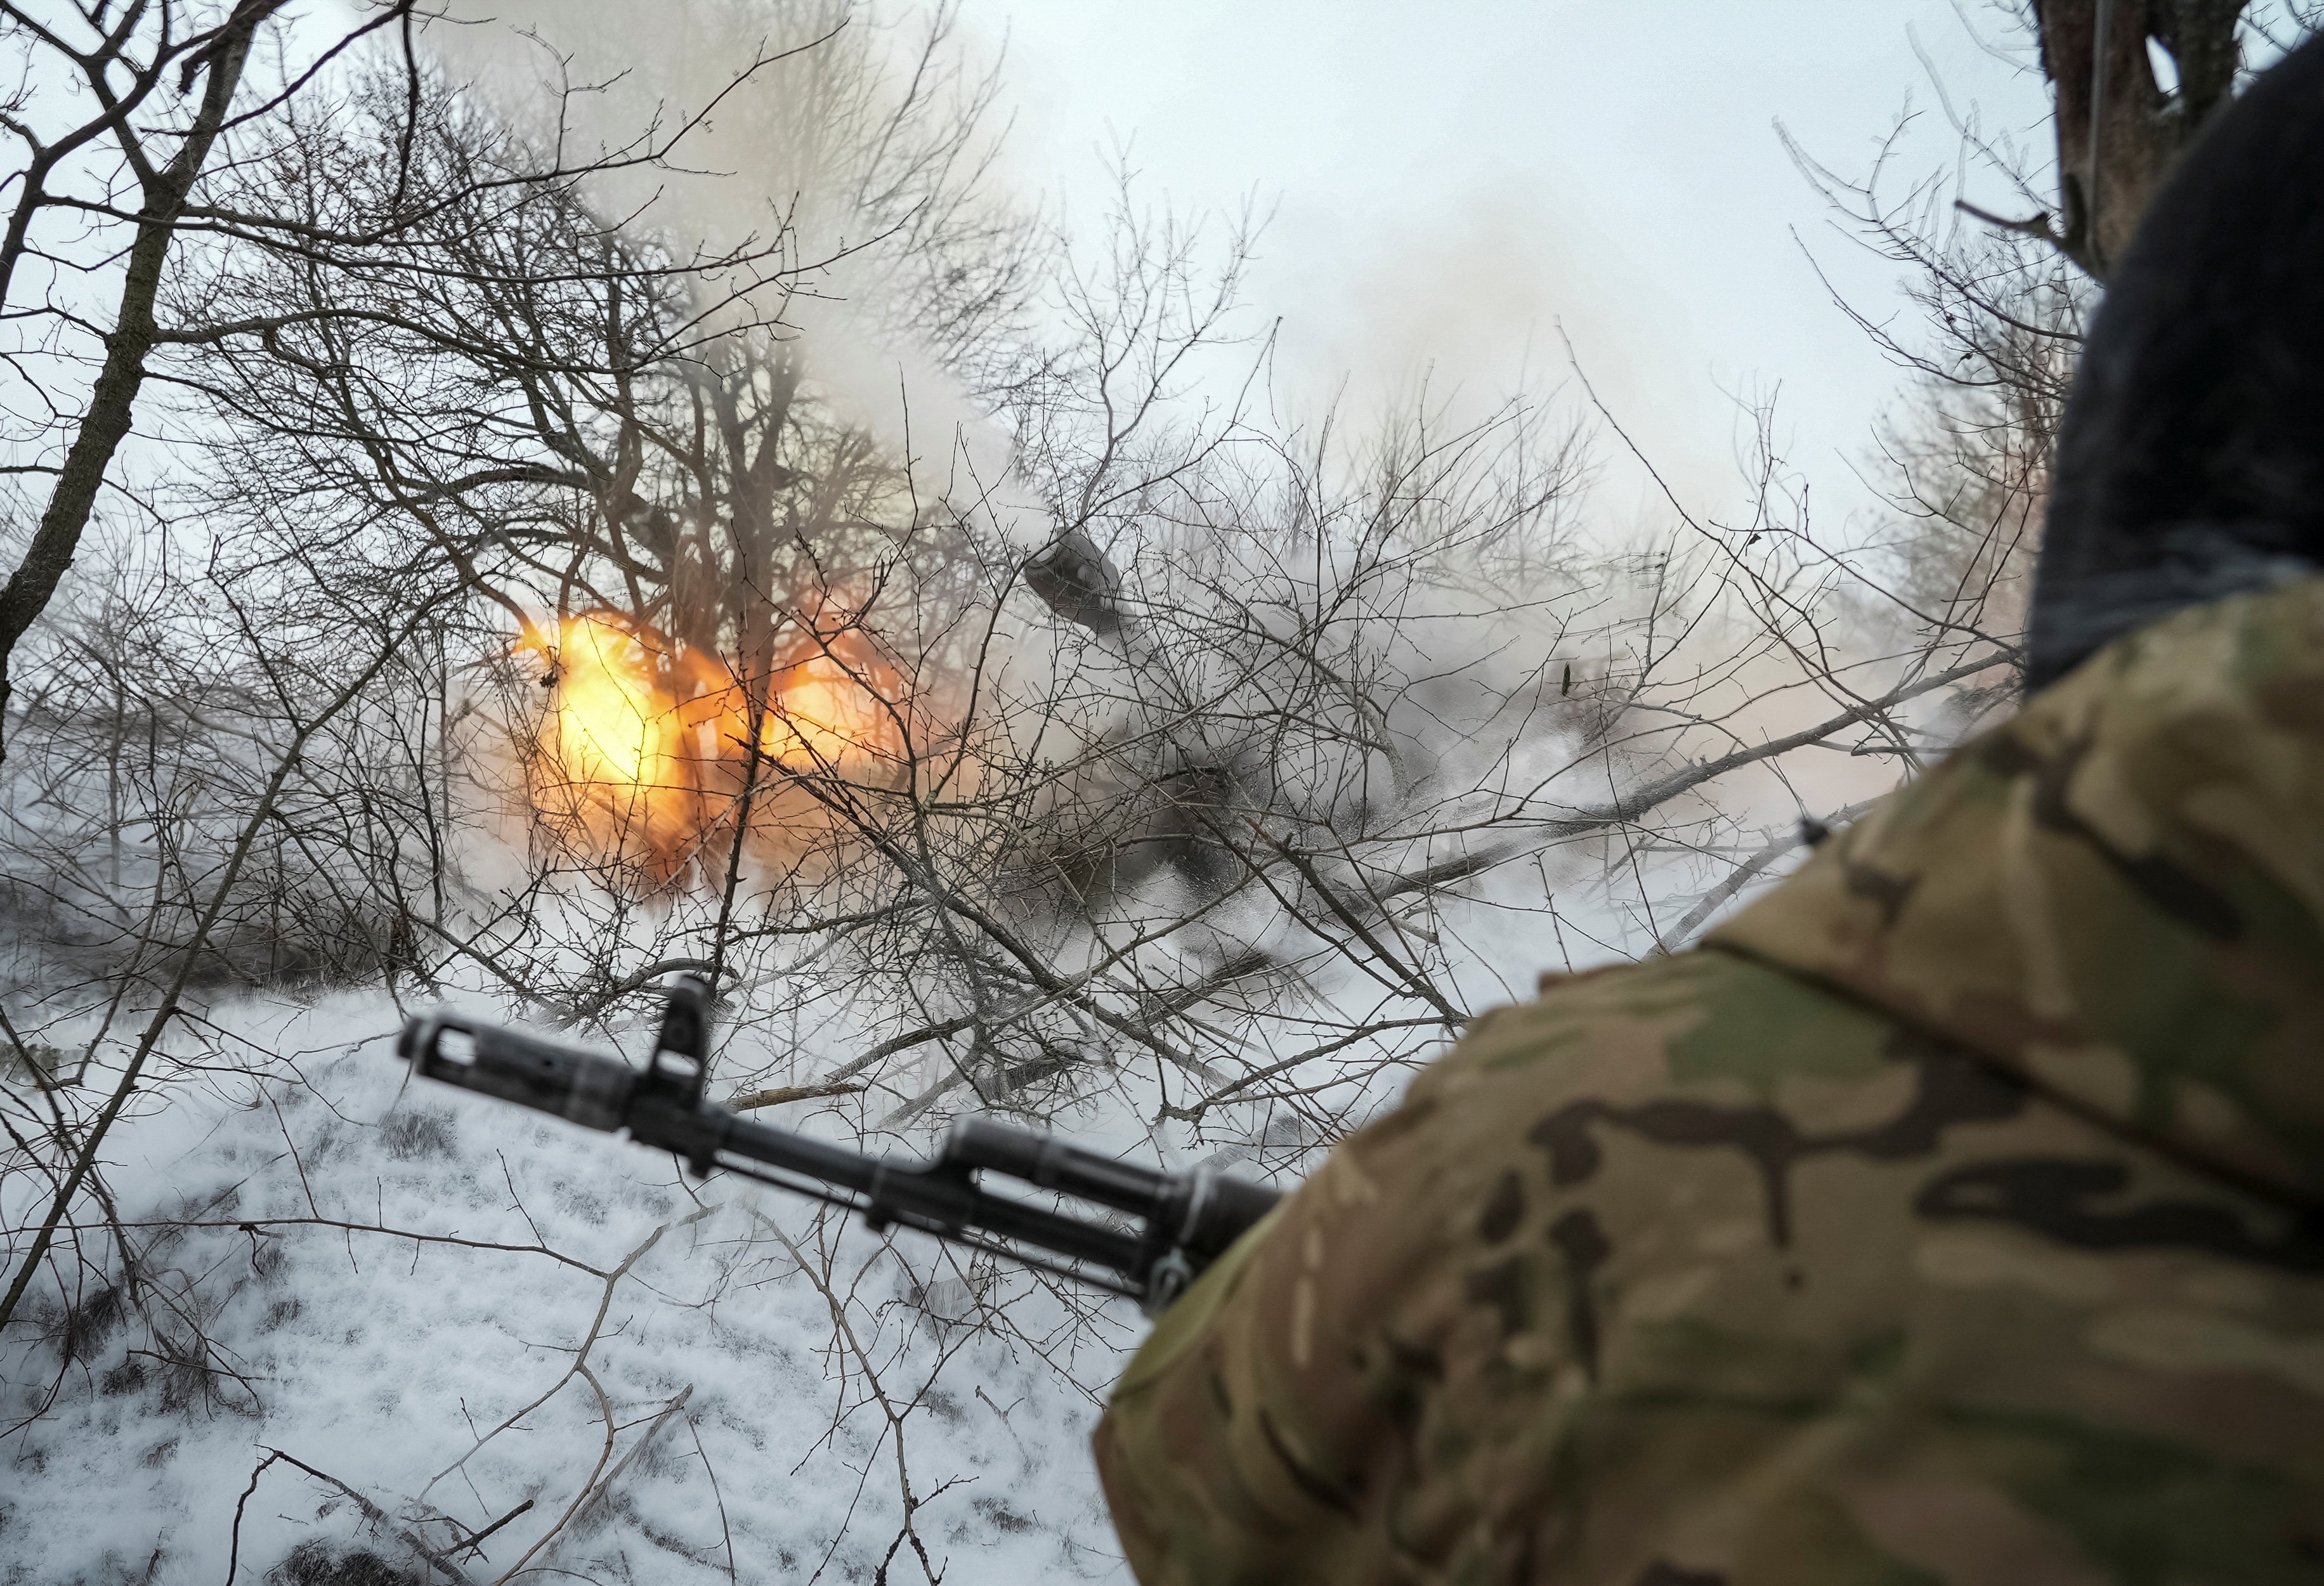 A Ukrainian serviceman with the 93rd Brigade fires a howitzer towards Russian troops, near the city of Chasiv Yar in Donetsk